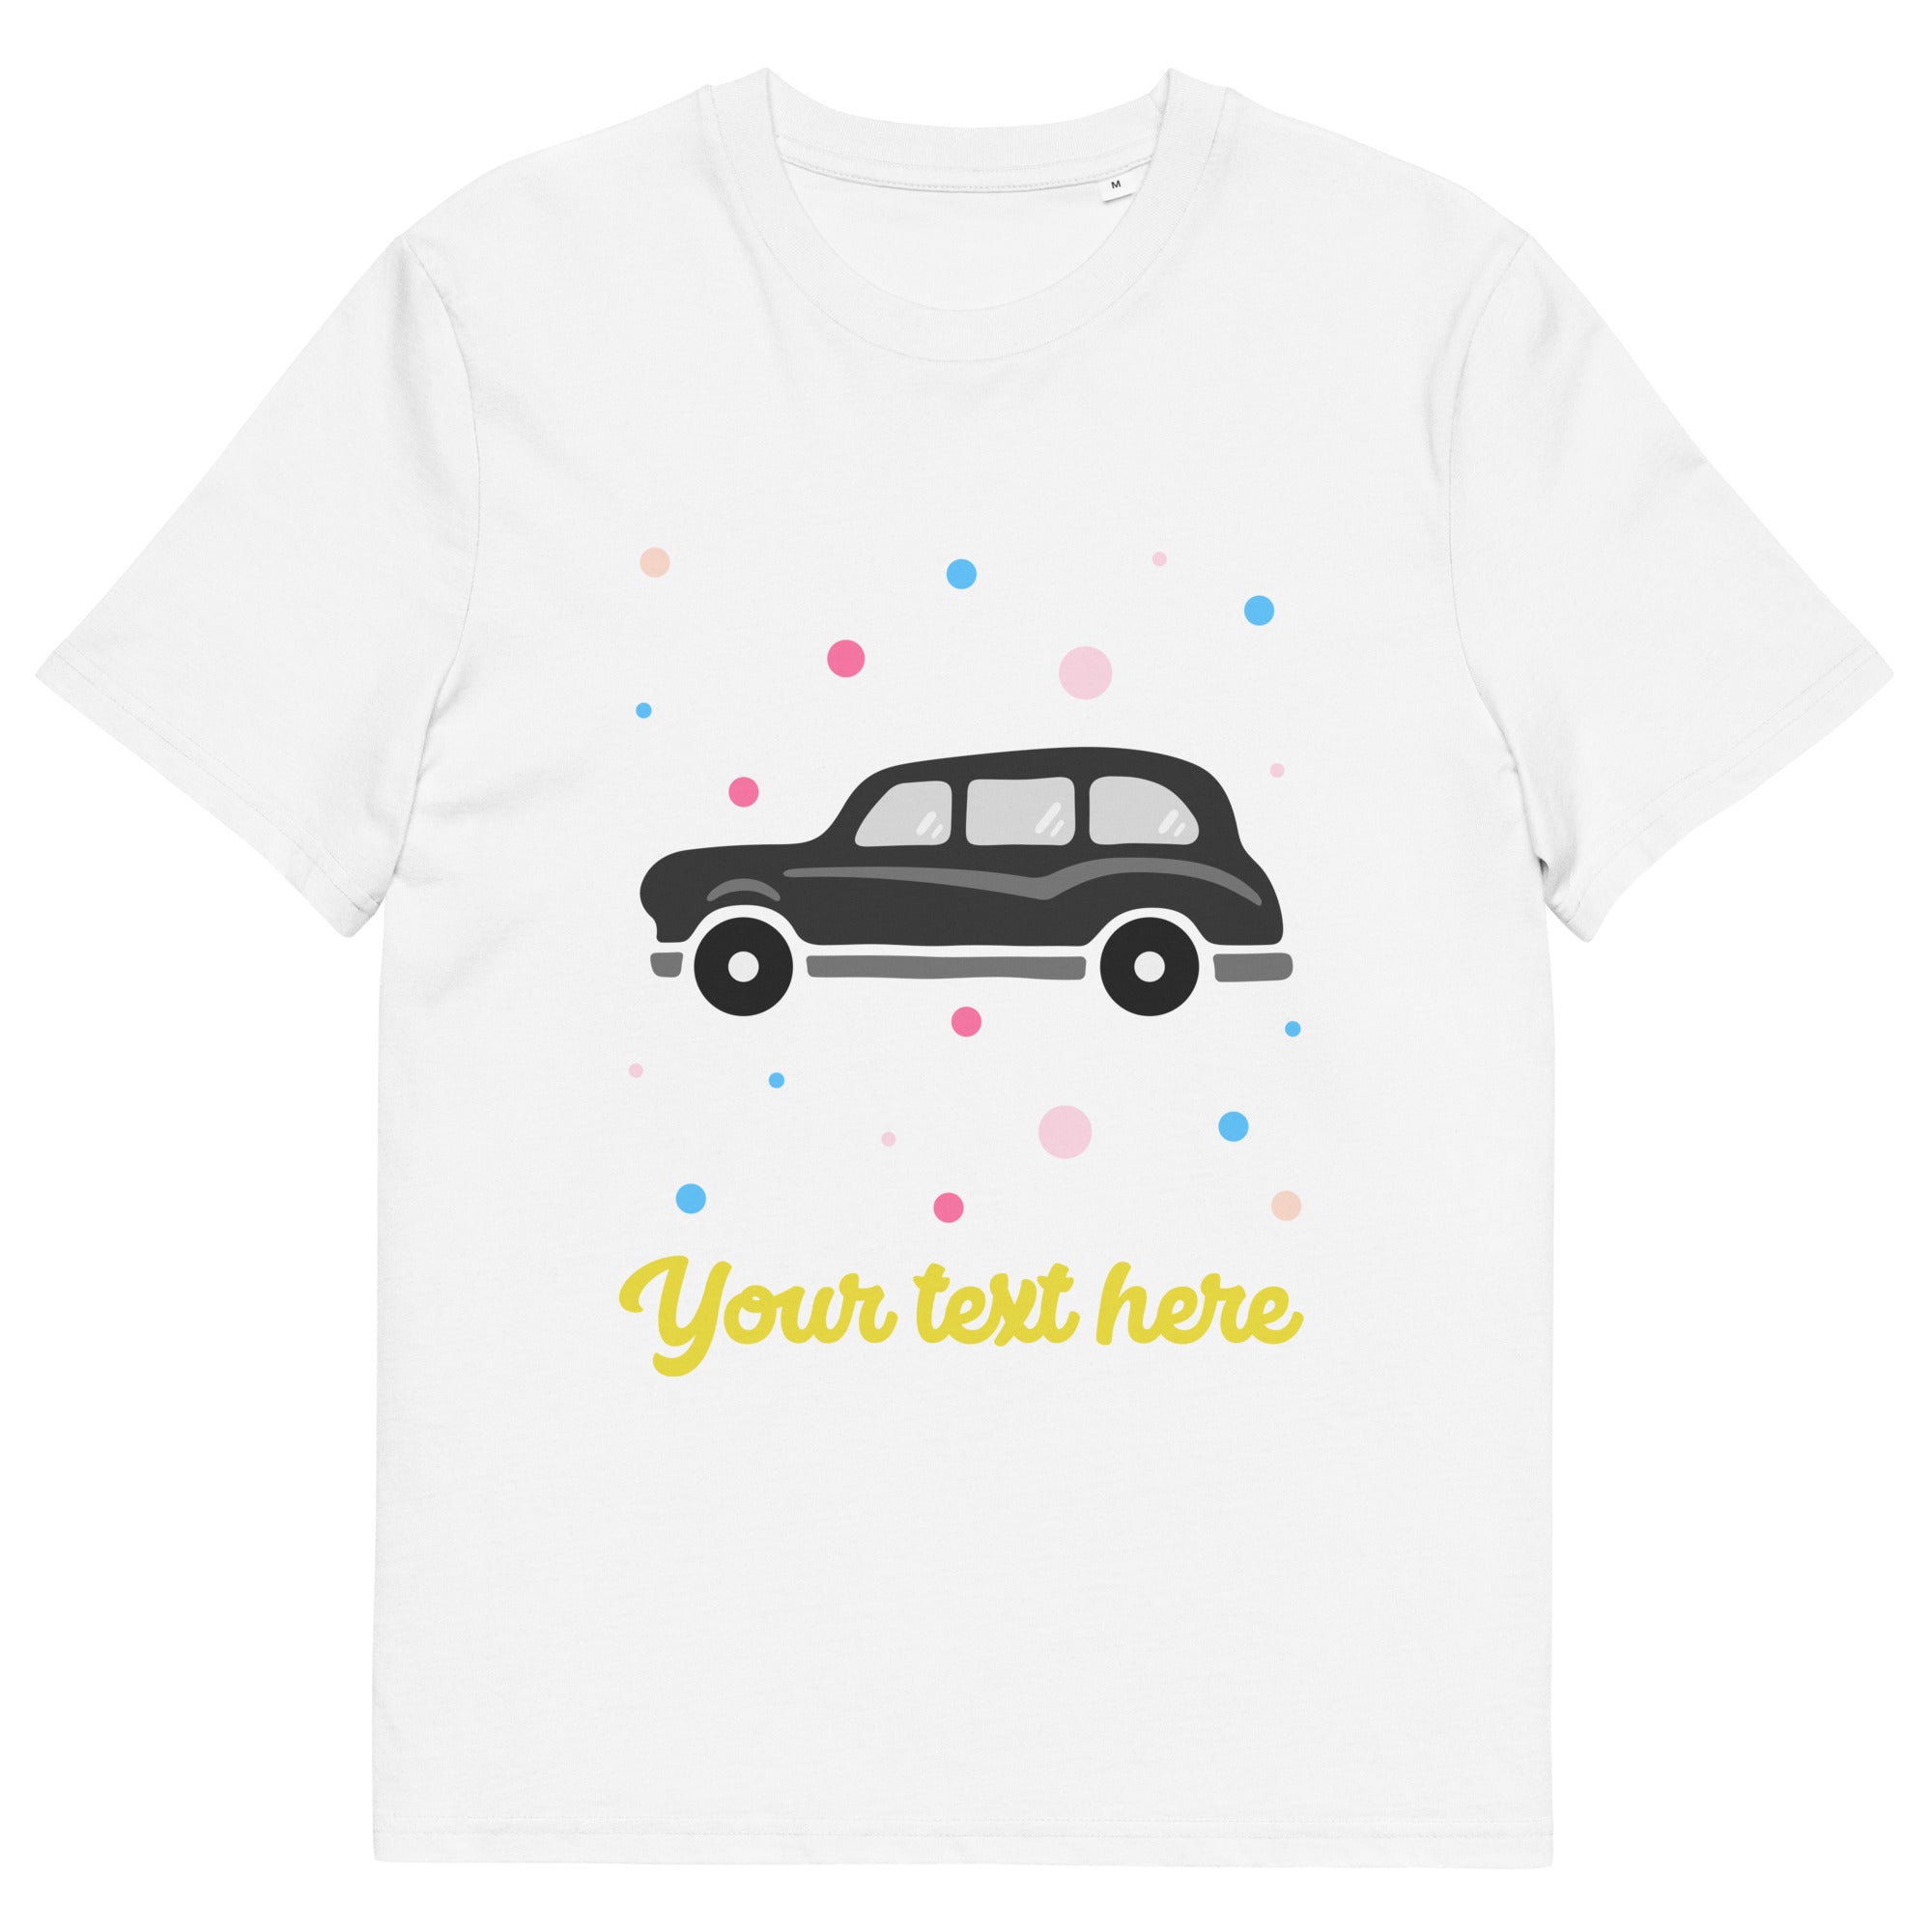 Personalised Custom Text - Organic Cotton Adults Unisex T-Shirt - London Doodles - Black Taxi